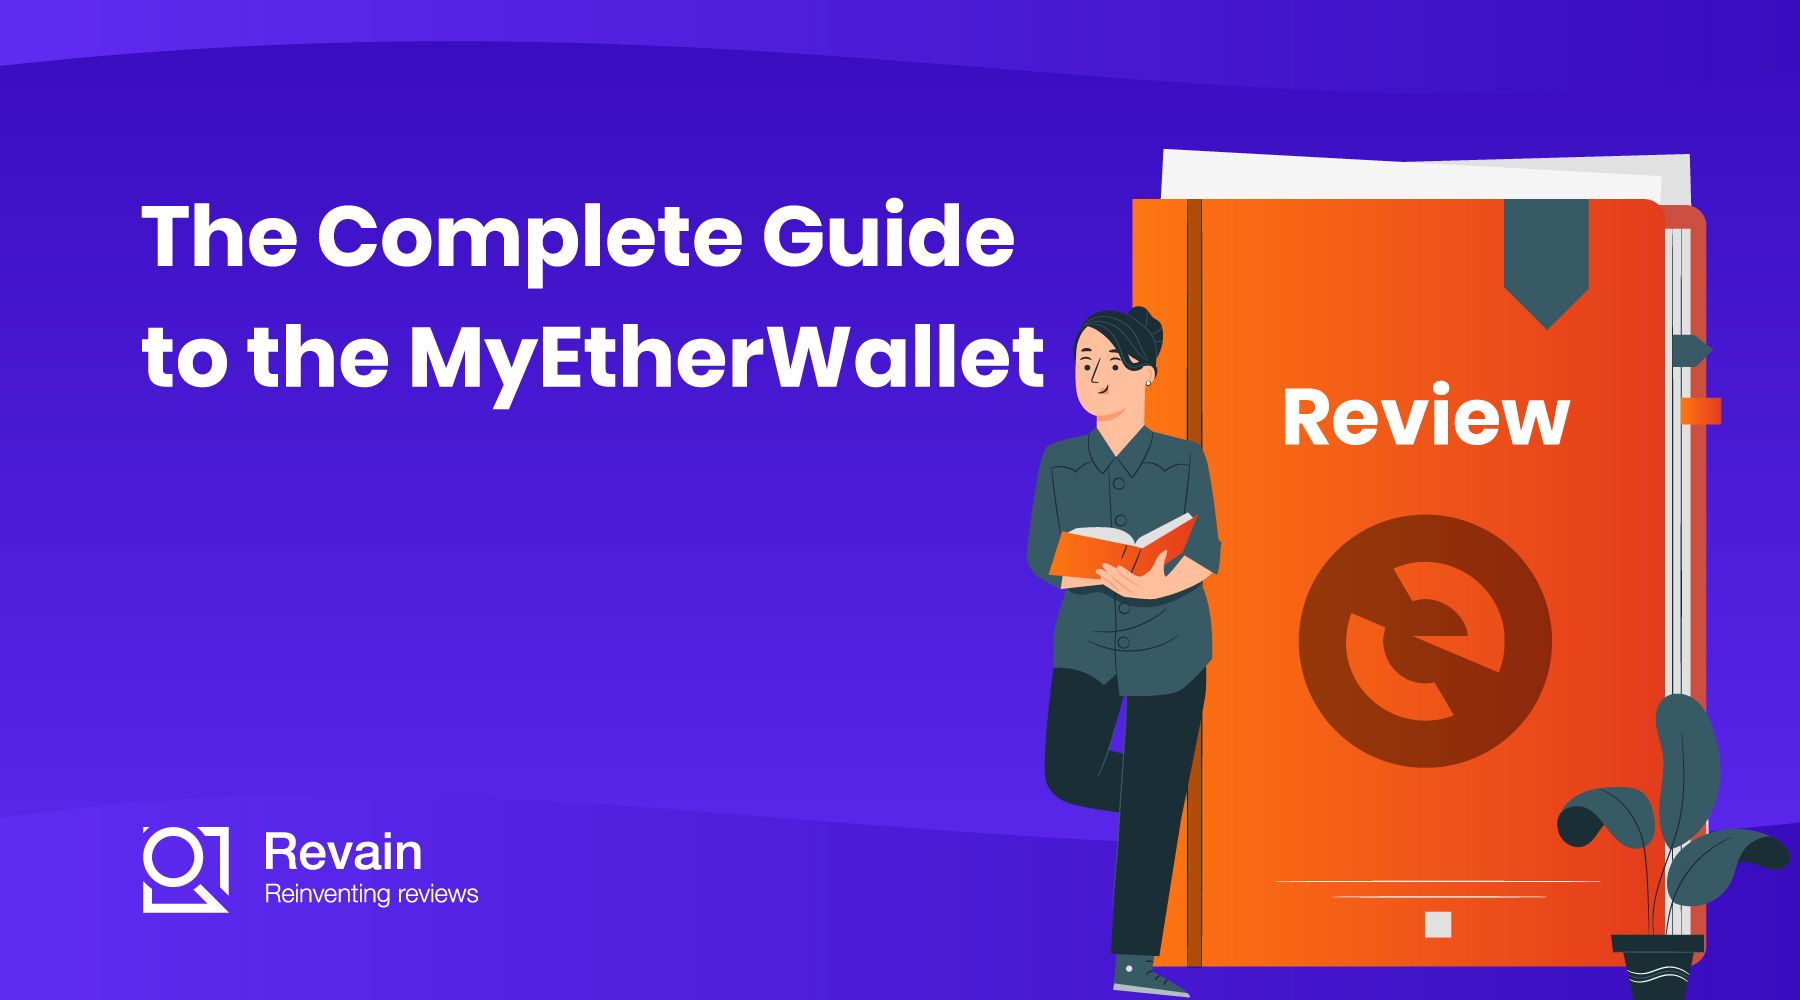 Article The Complete Guide to the MyEtherWallet